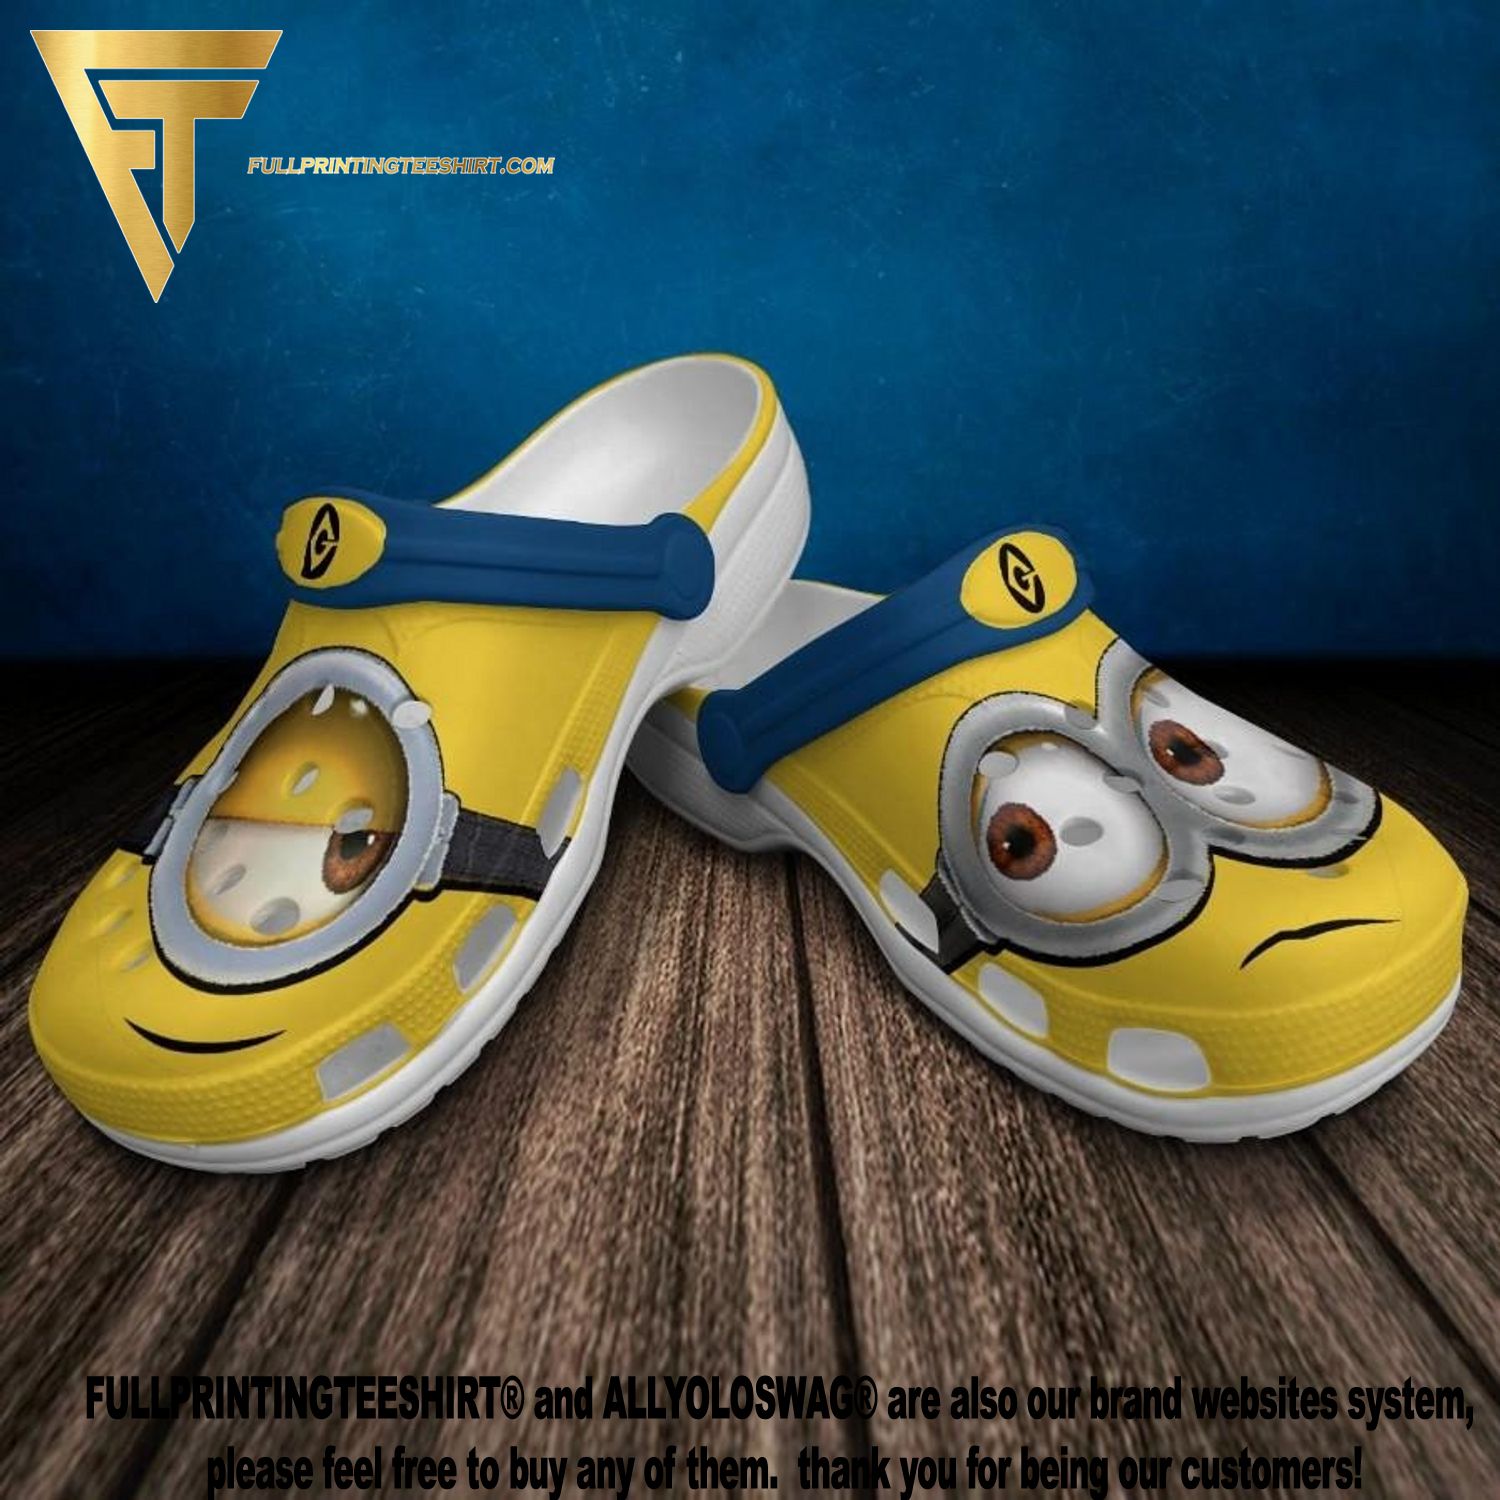 Top-selling Minion Men And Women Hypebeast Fashion Unisex Crocband Clogs